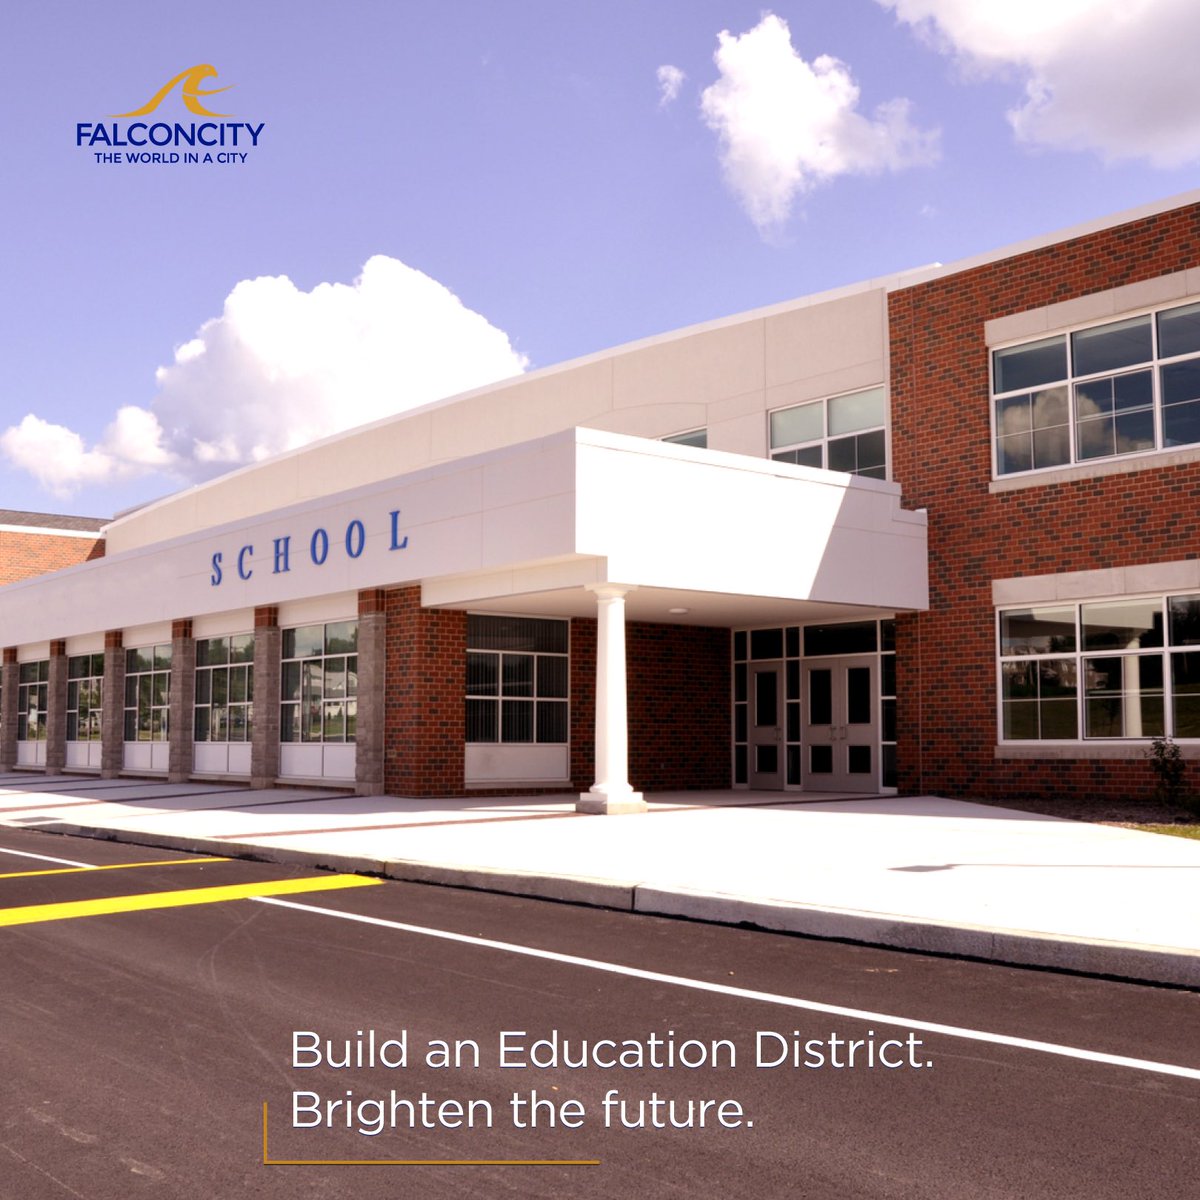 #FalconcityPlots now give you the opportunity to build an #education district. Being the most ancient form of enlightenment, this is your chance to facilitate this passing of the light of knowledge by building a magnificent #EducationDistrict at the heart of #Dubai.